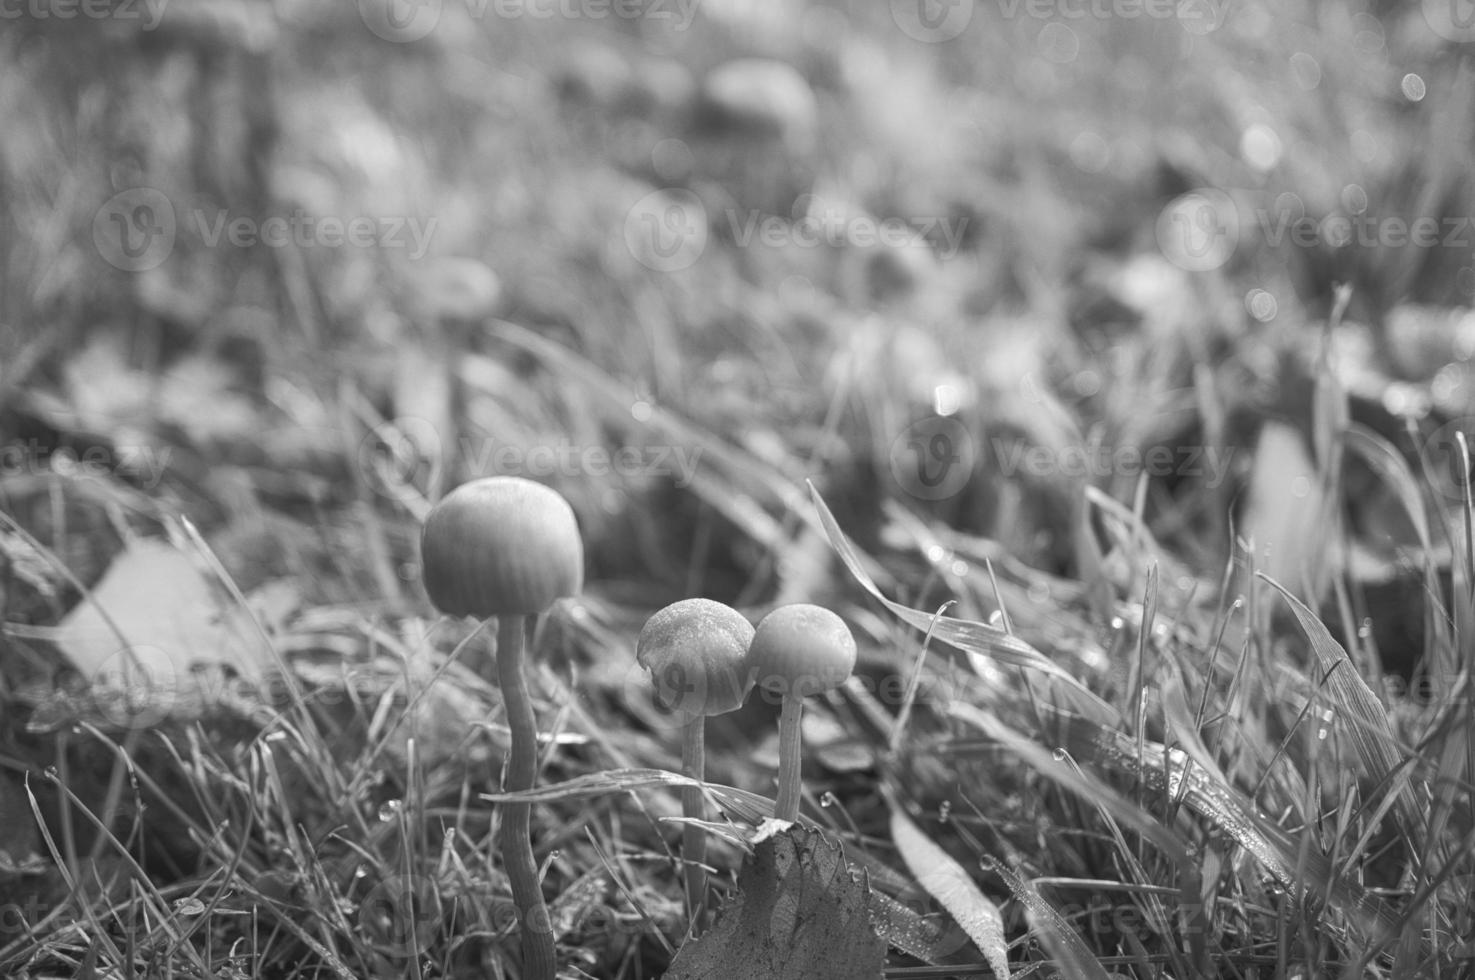 Filigree mushrooms in black and white taken on a meadow. Macro view from the habitat photo